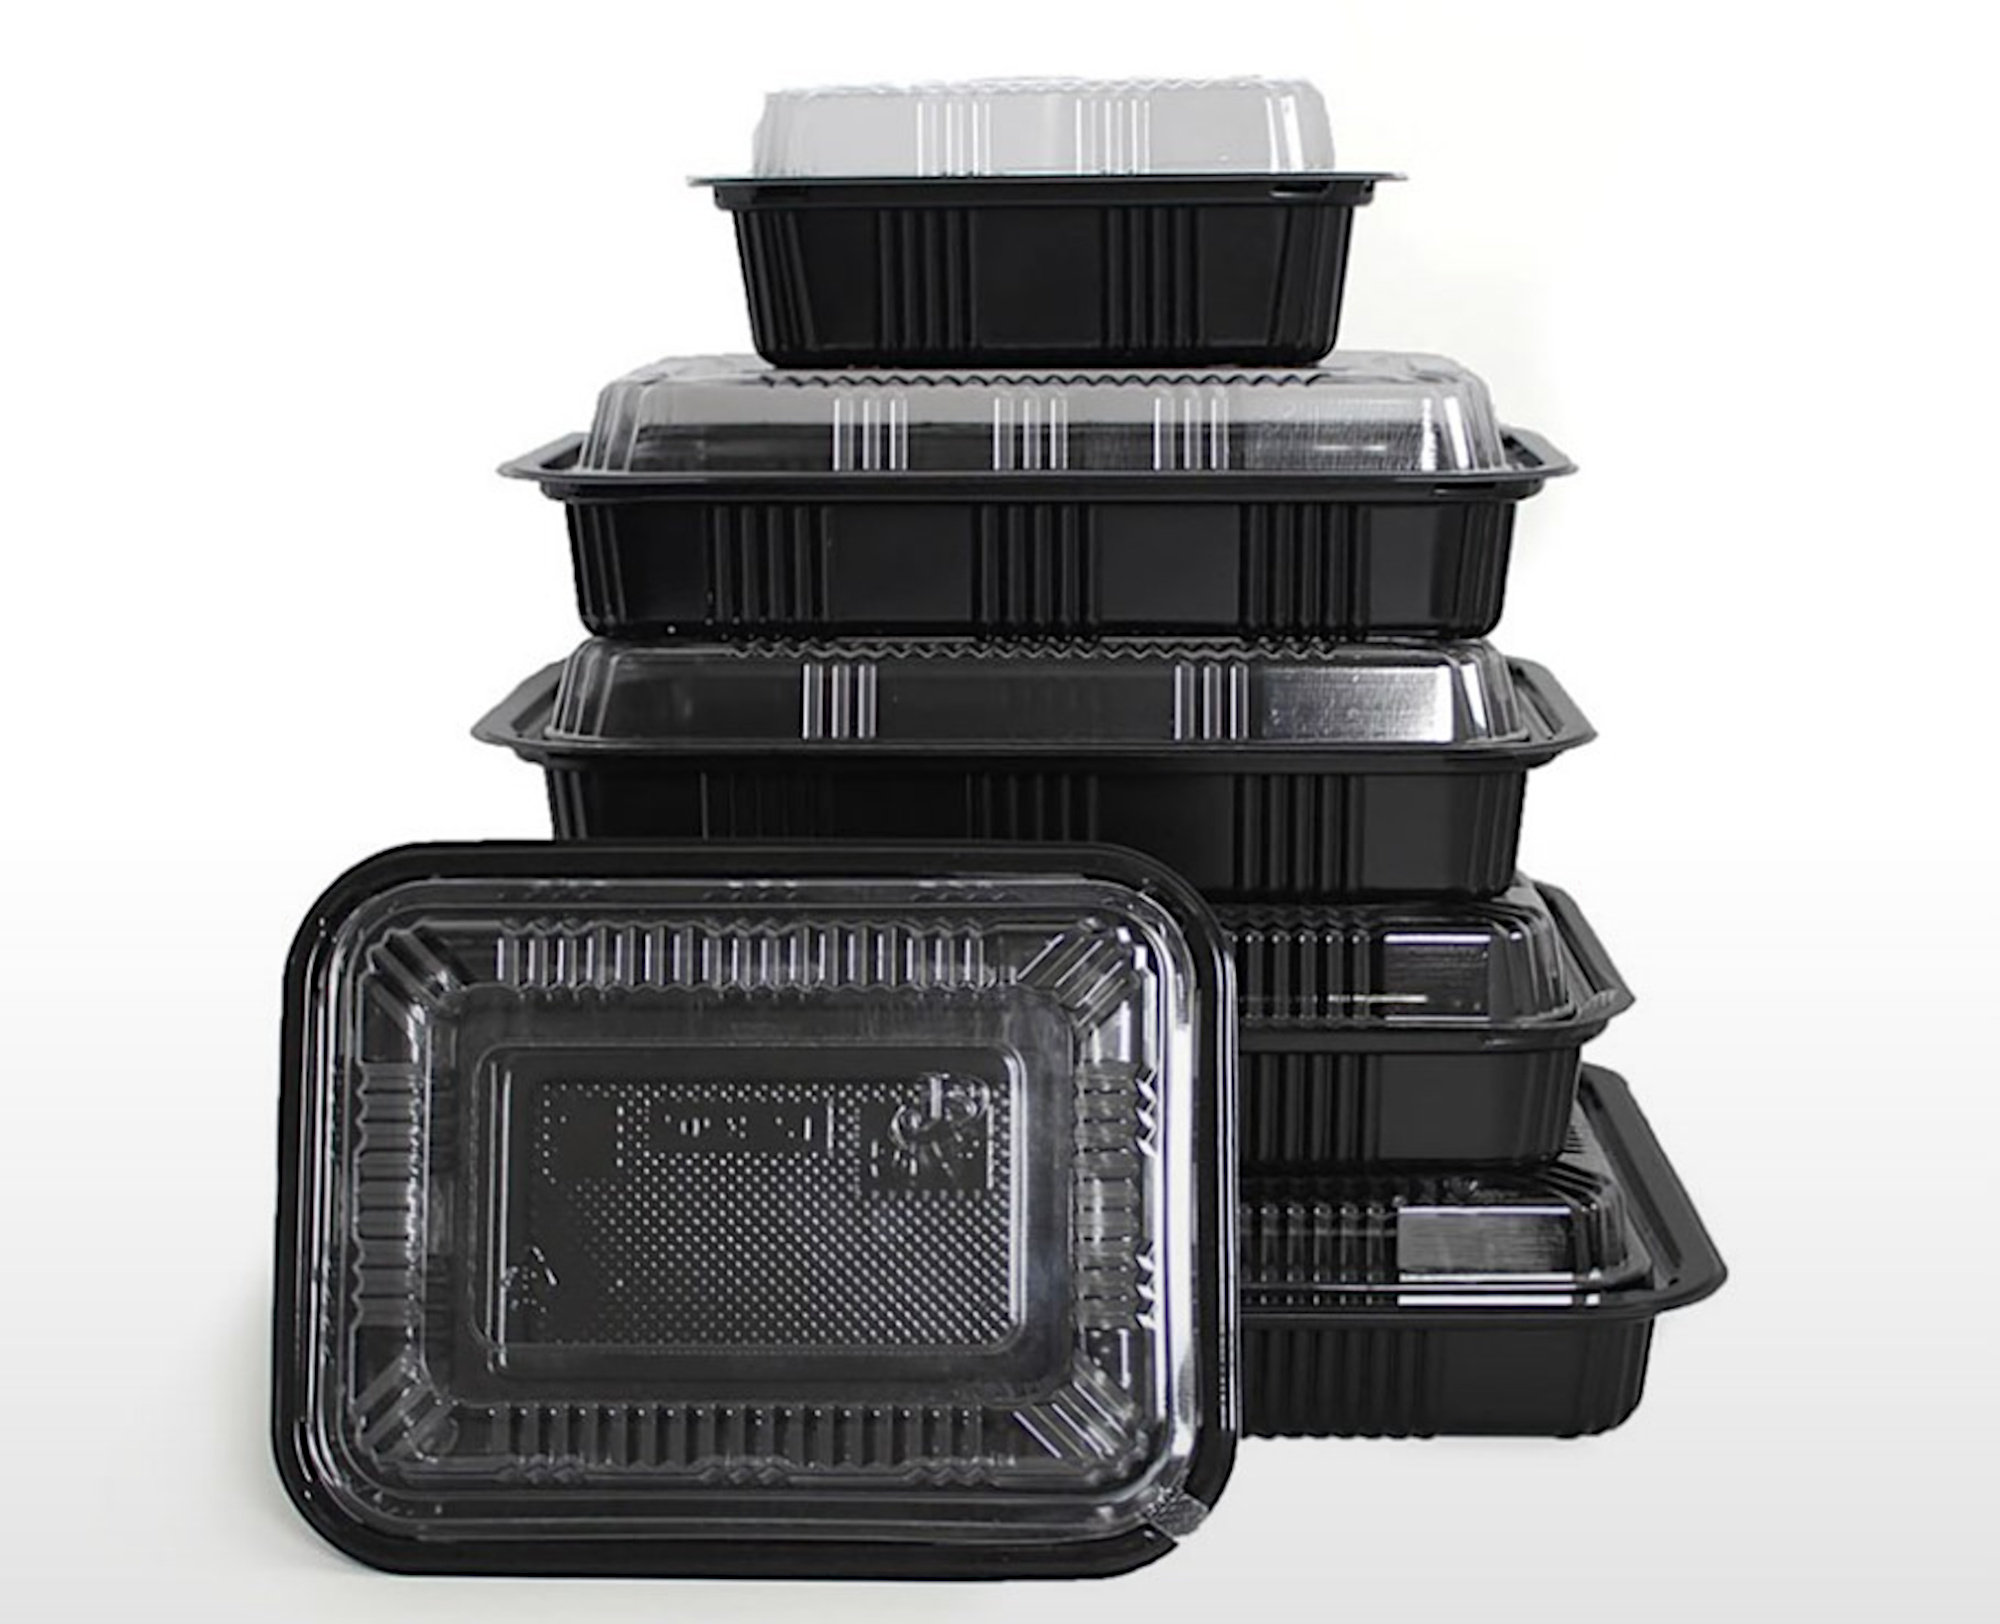 CLIPIN Disposable Plastic Serving Tray for 100 Guests